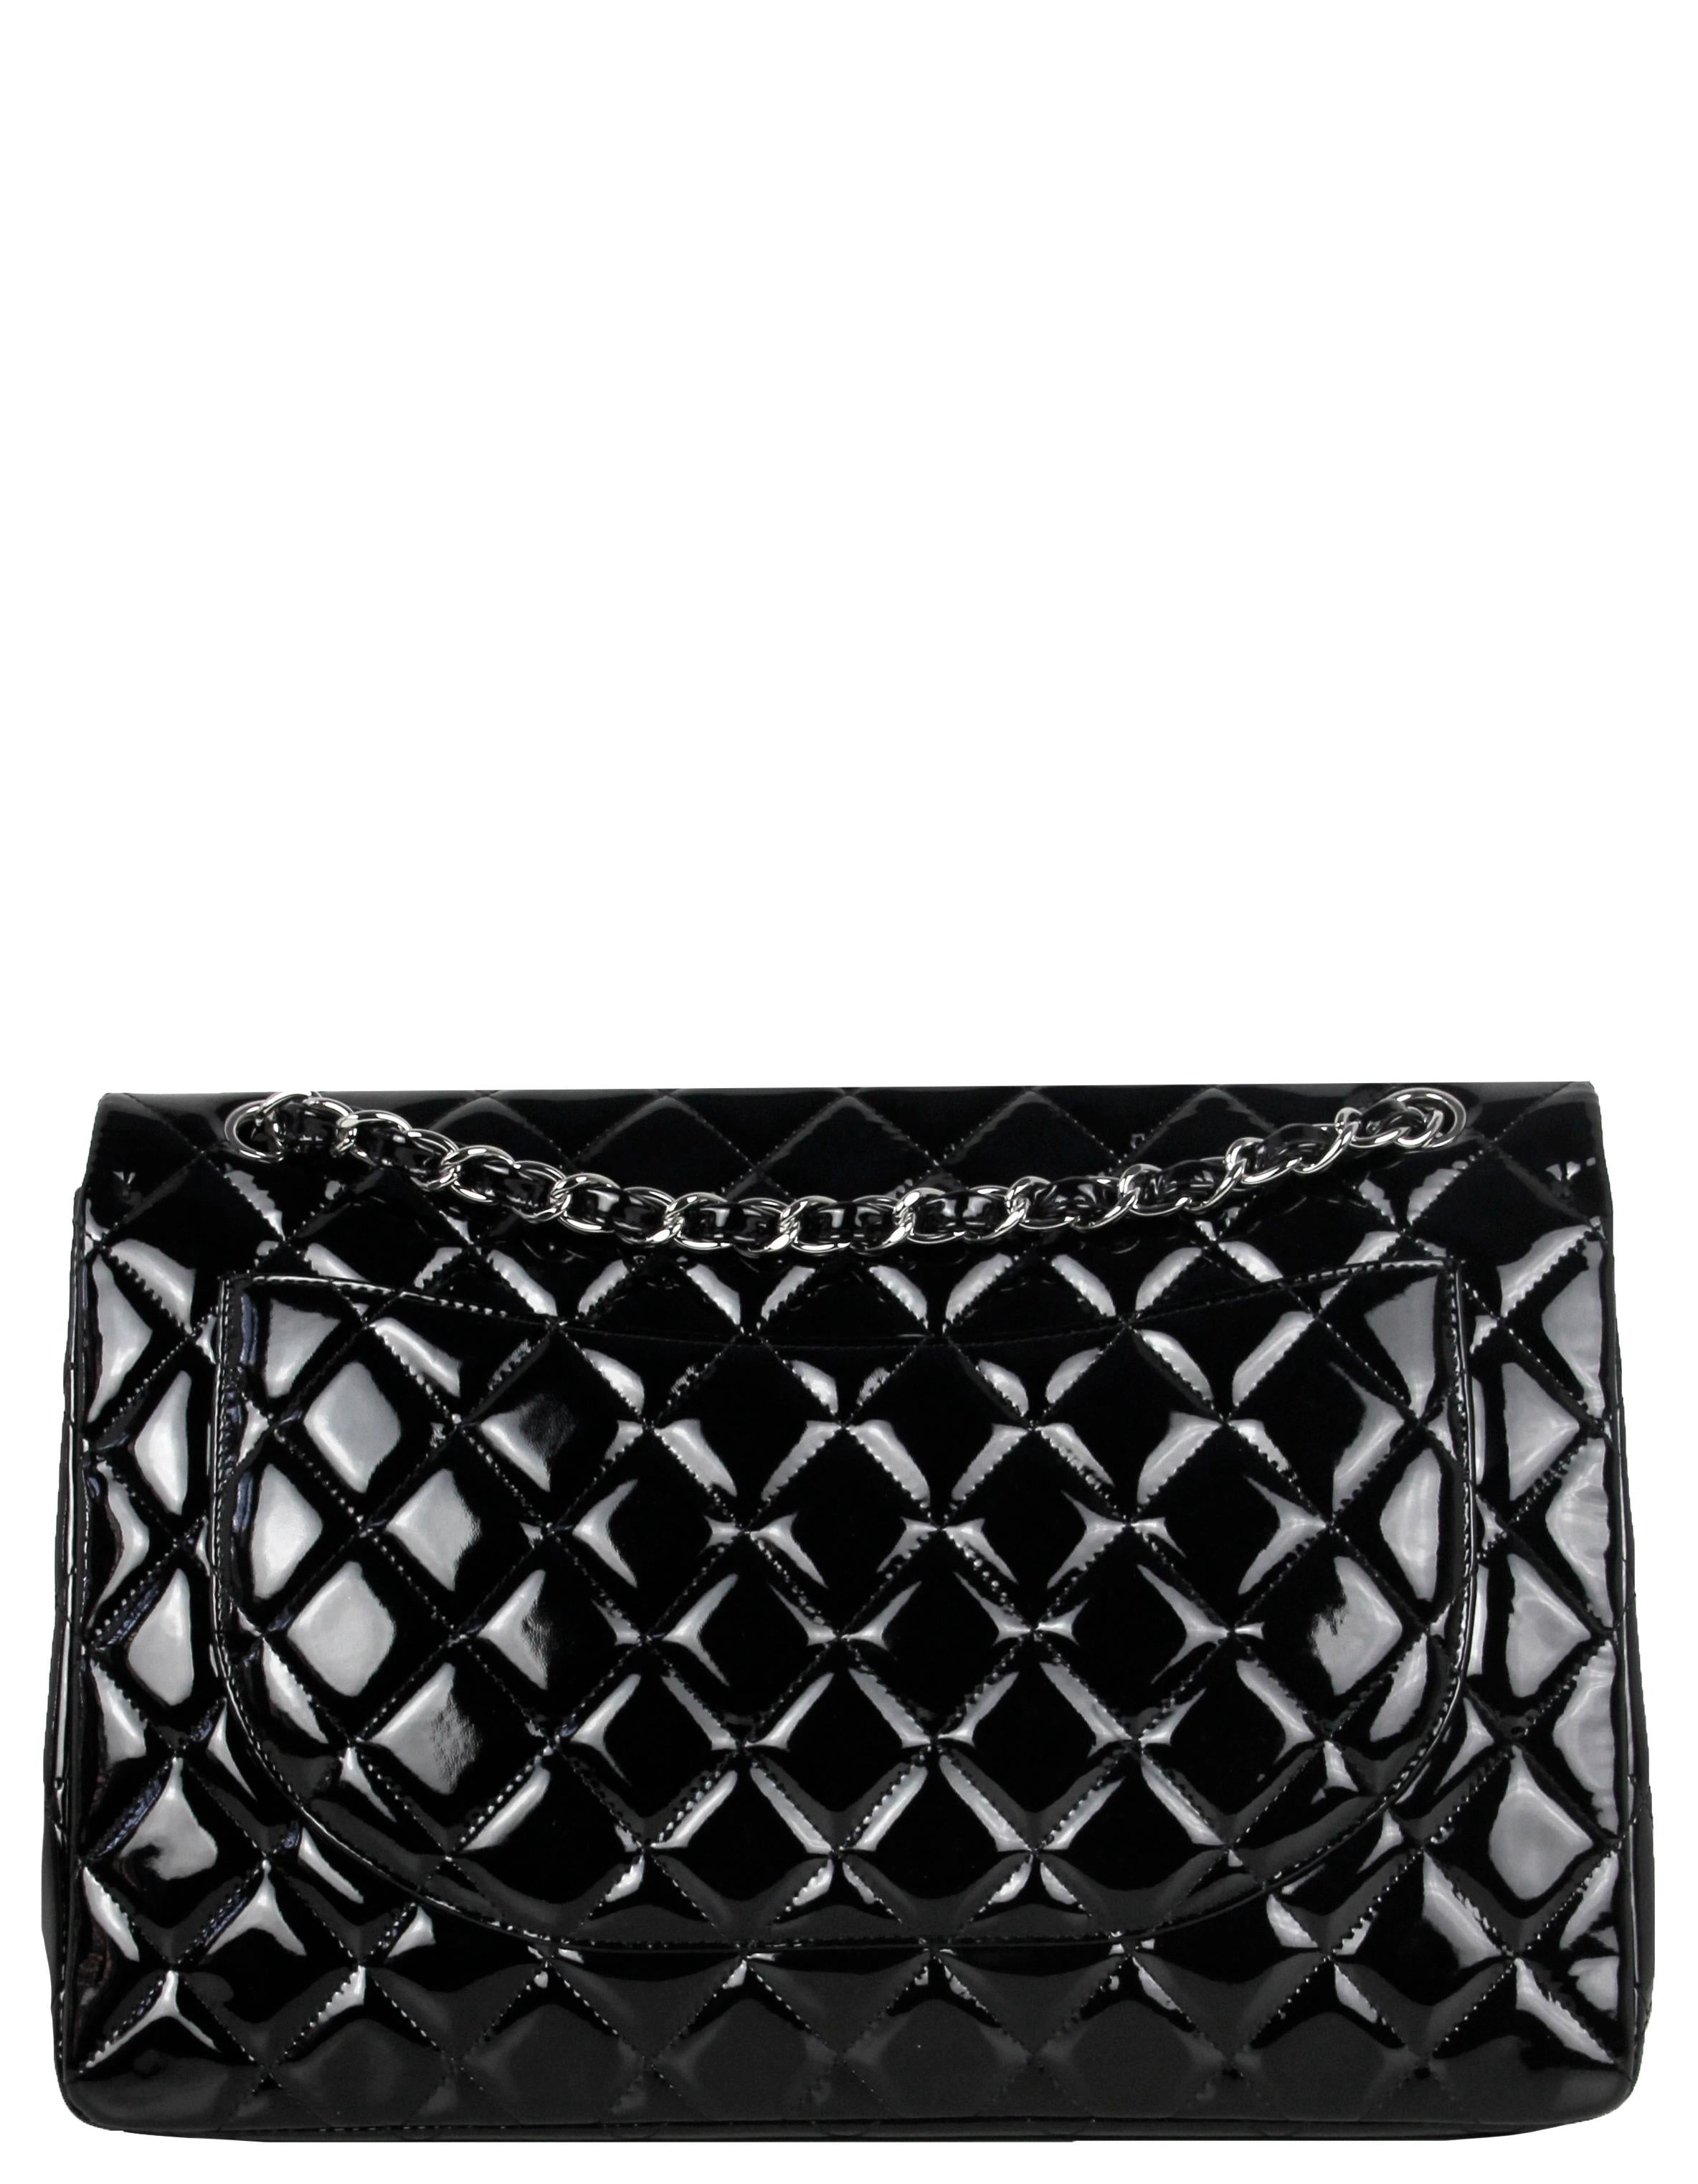 Women's Chanel Black Patent Leather Quilted Single Flap Maxi Classic Bag For Sale